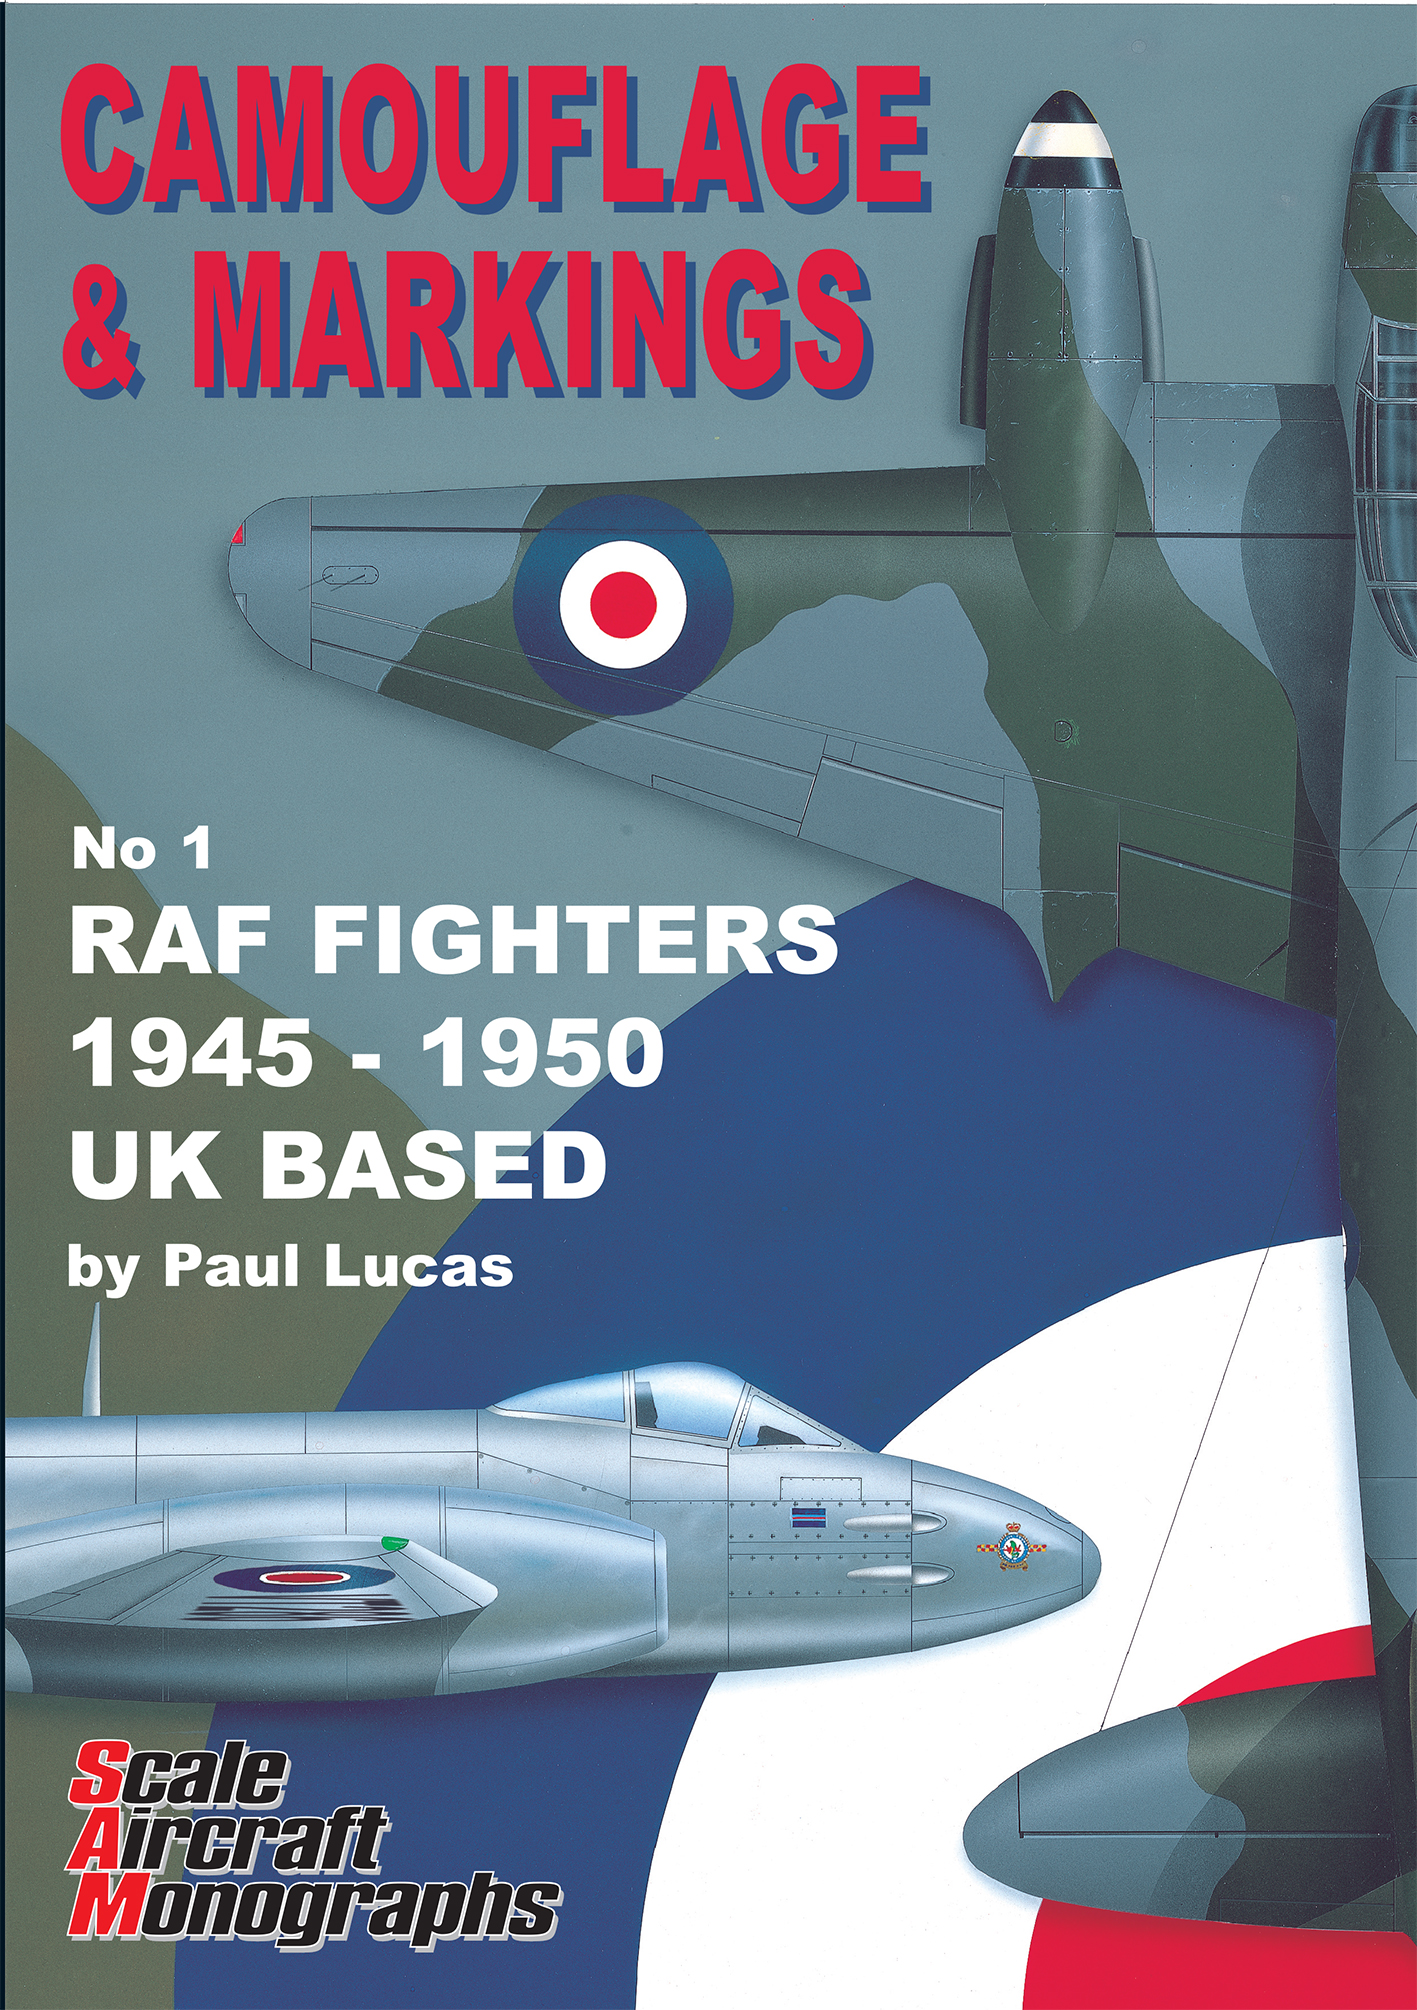 Guideline Publications Camouflage & Markings no 1 RAF Fighters 1945 - 1950 RAF Fighters 1945 - 1950 UK based 